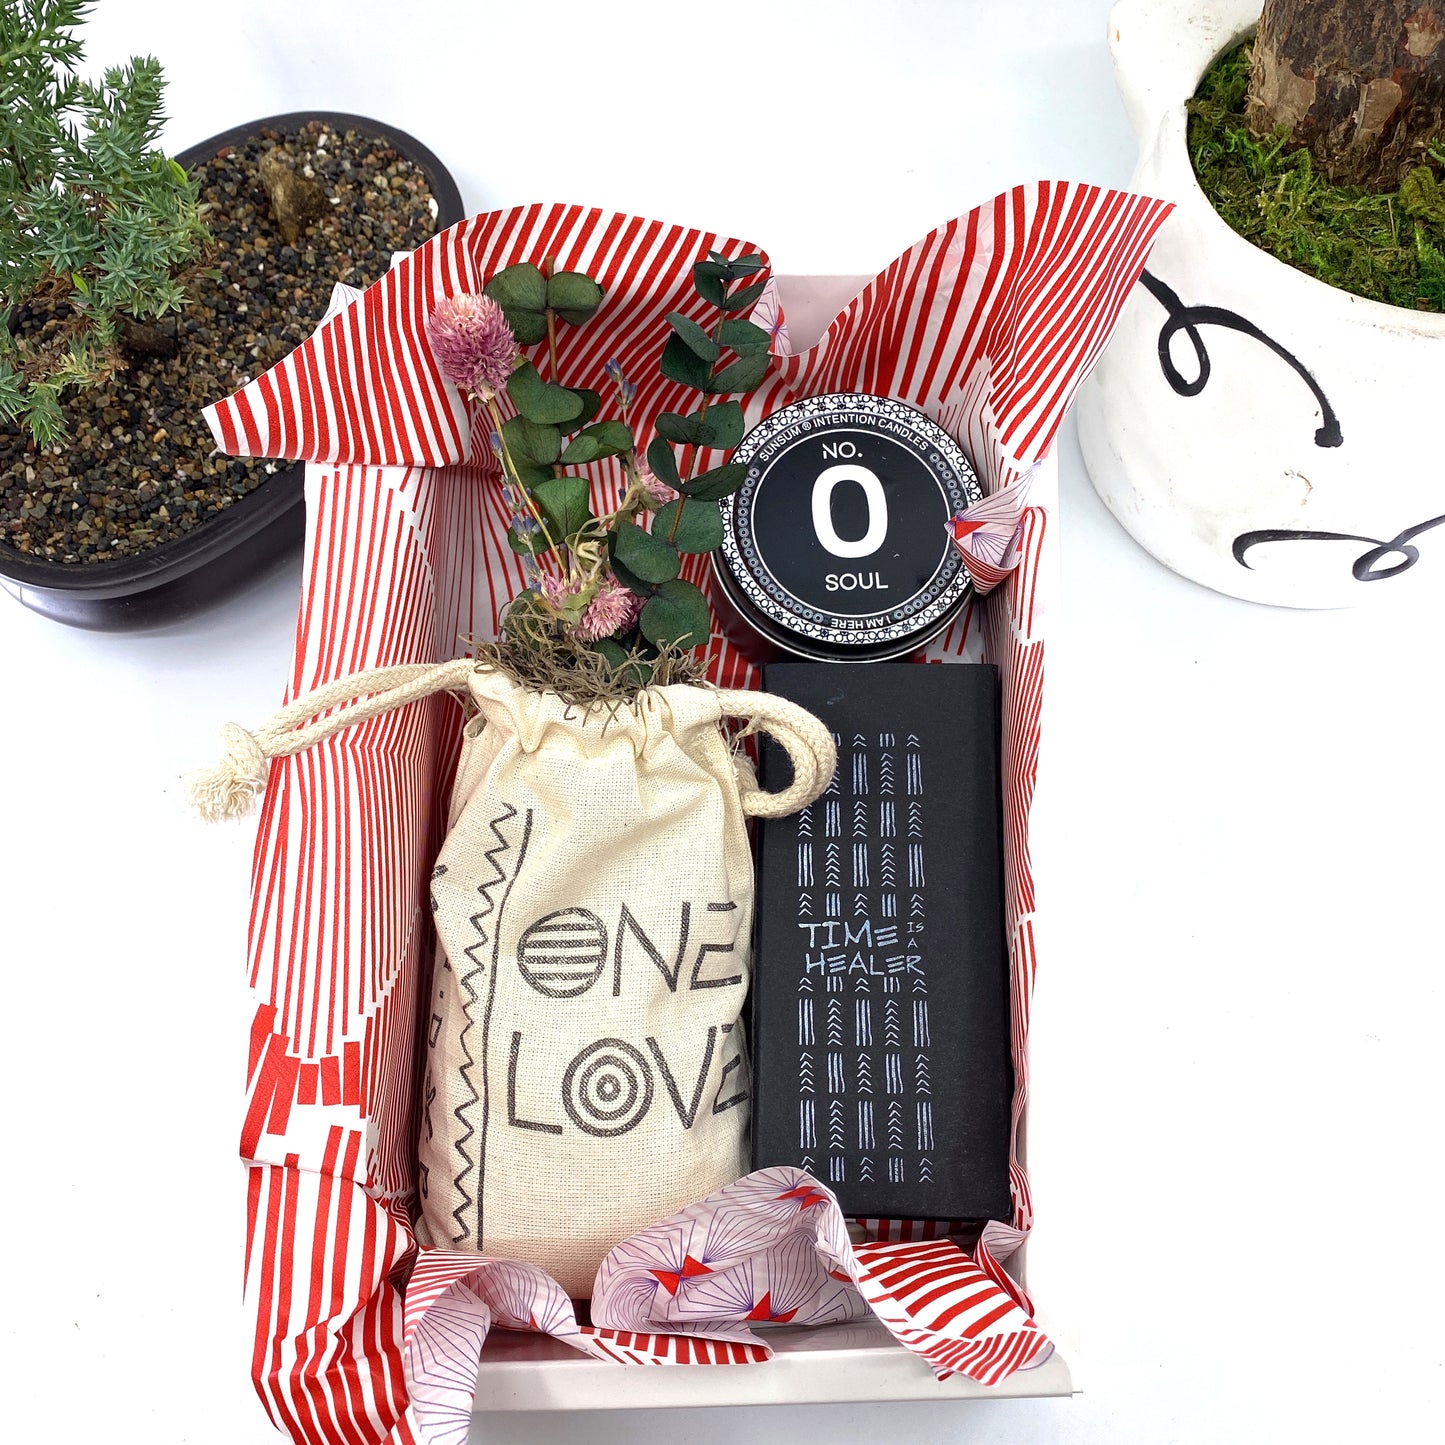 Words of Affirmation, One Love, Dried Flower Bouquet & Self-Care, Gift Set Sunsum®